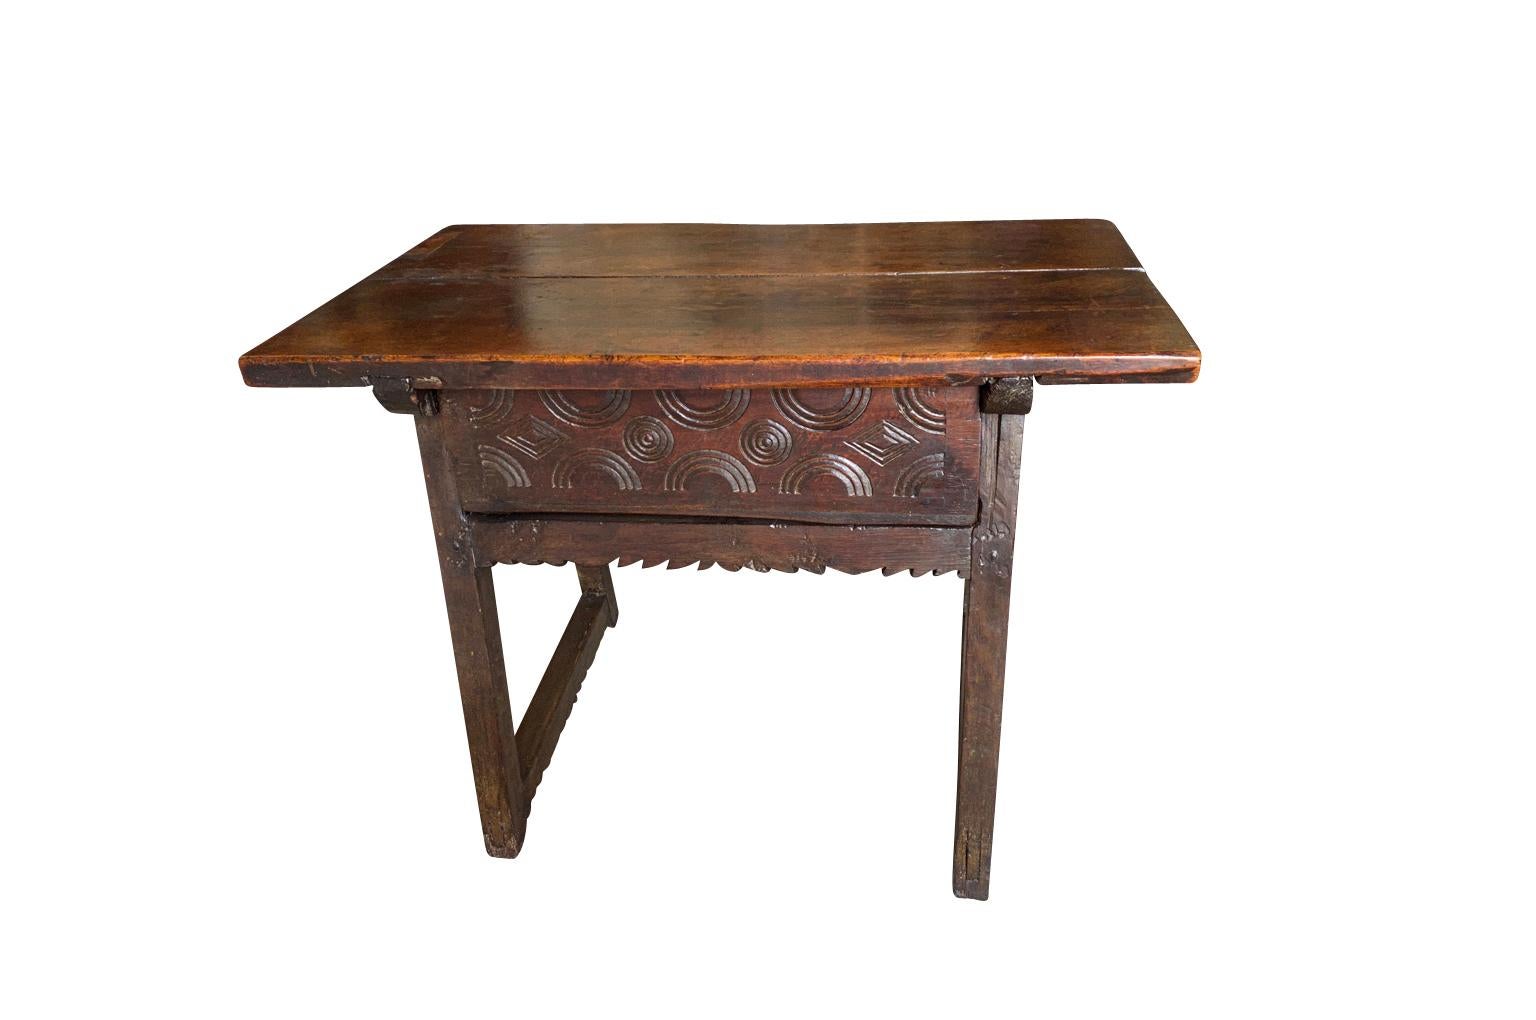 A wonderful mid-18th century side table in beautiful walnut & chestnut from the Catalan region of Spain. Soundly constructed with single drawer with charming carvings to its facade. Excellent patina.